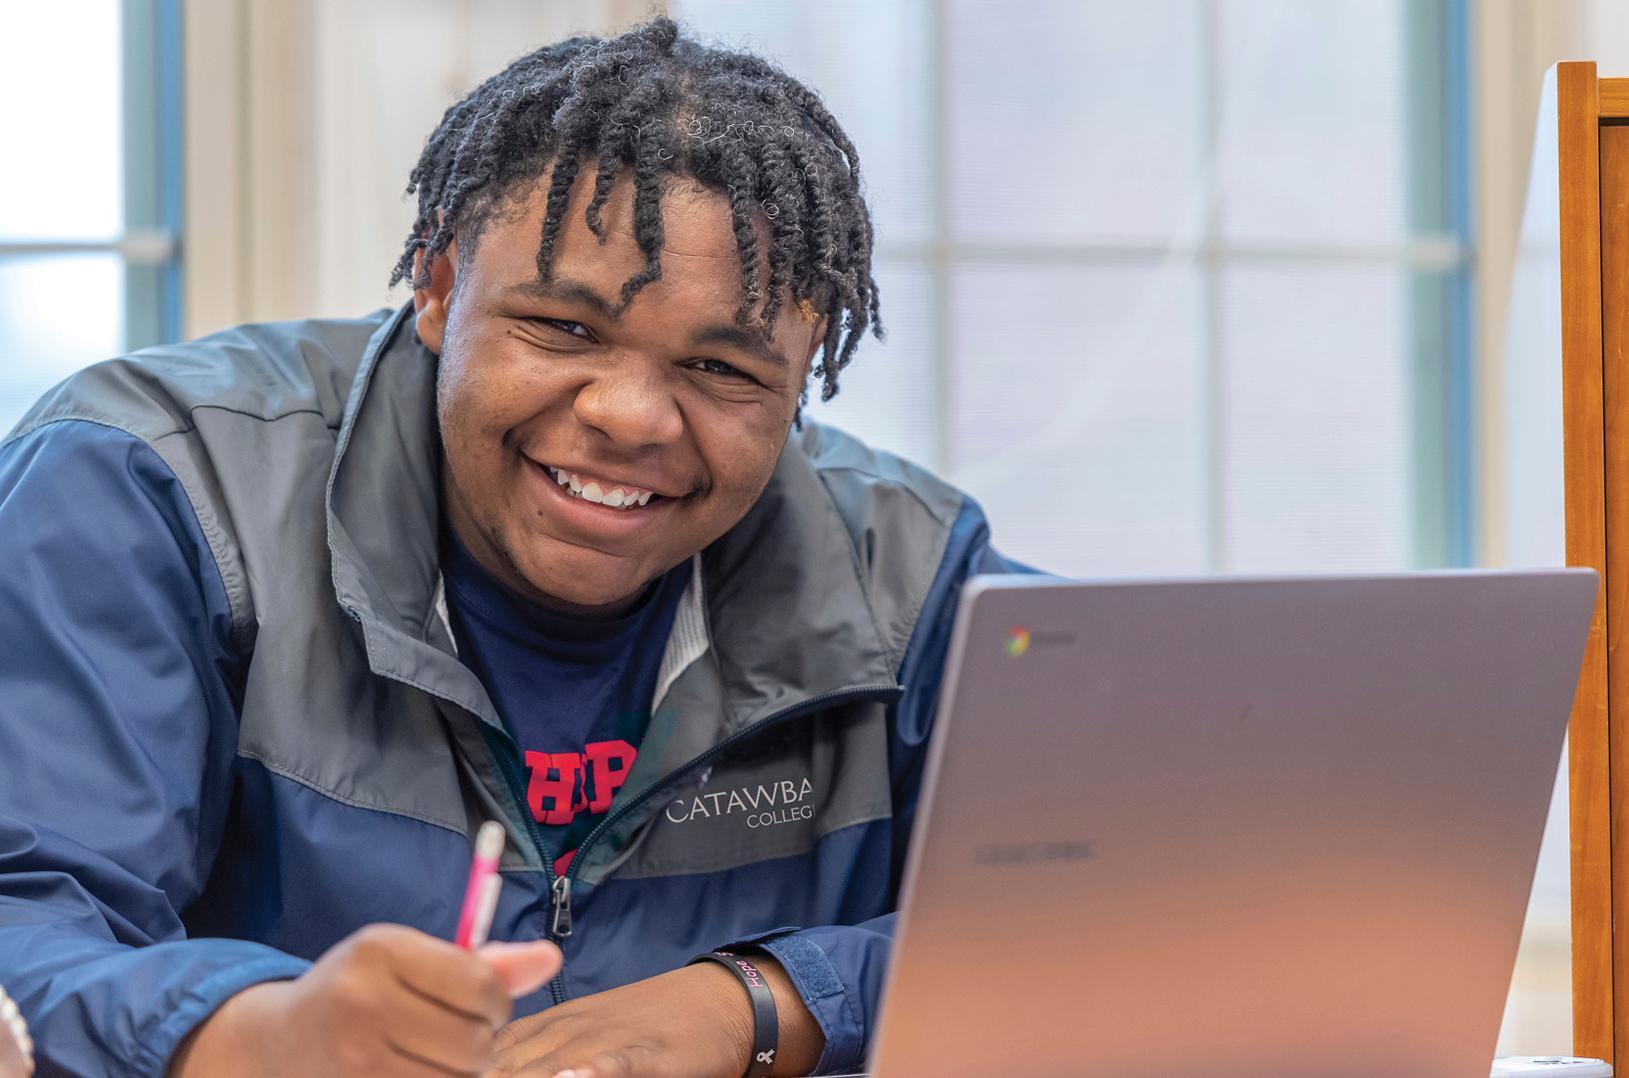 Catawba College student smiling at computer